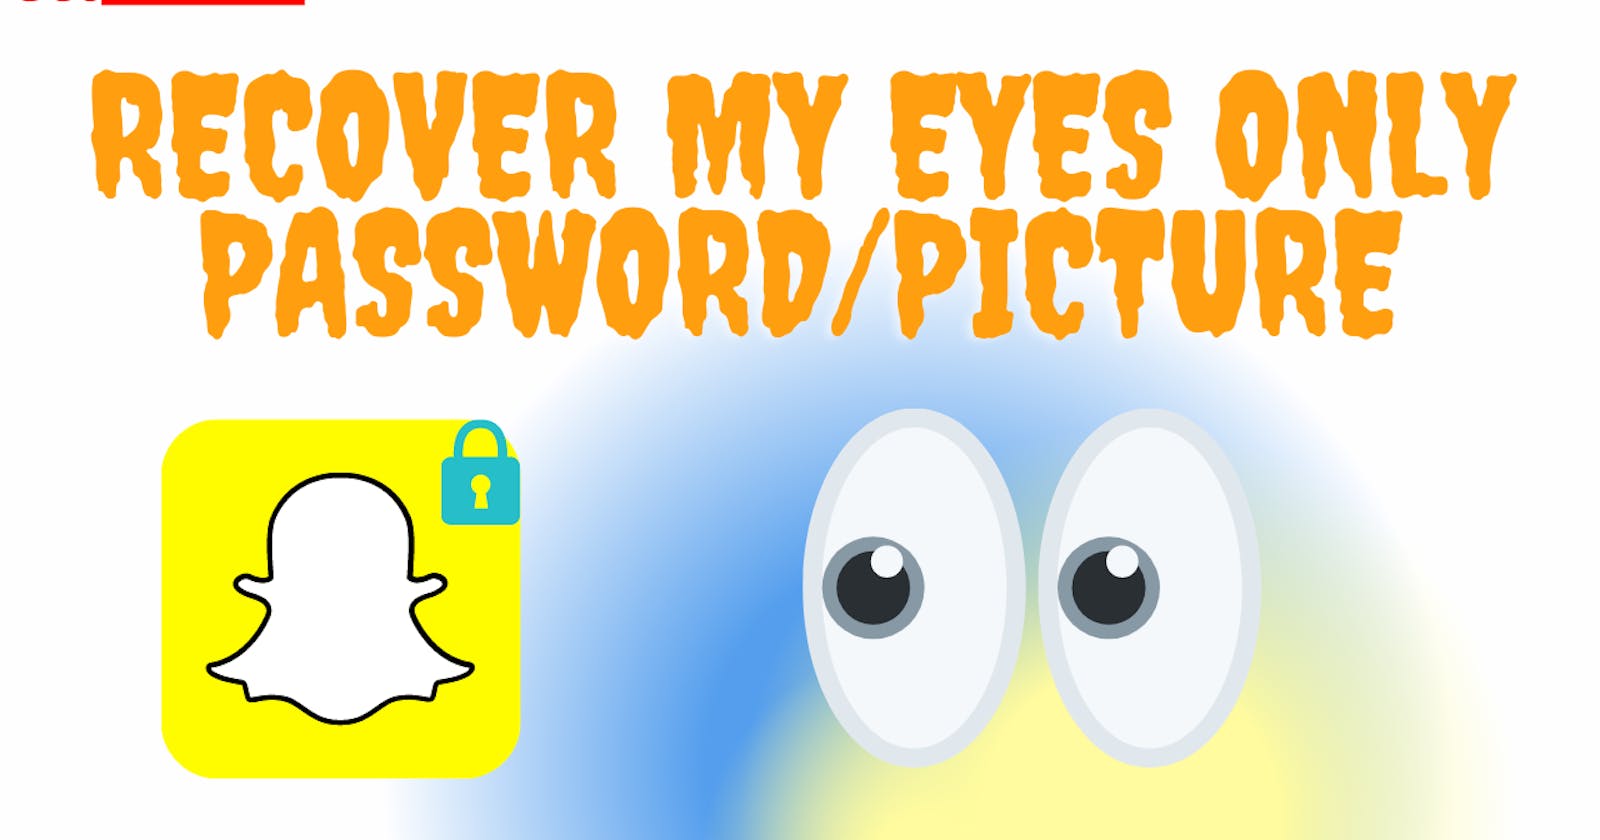 How to recover my eyes with only a picture/password?